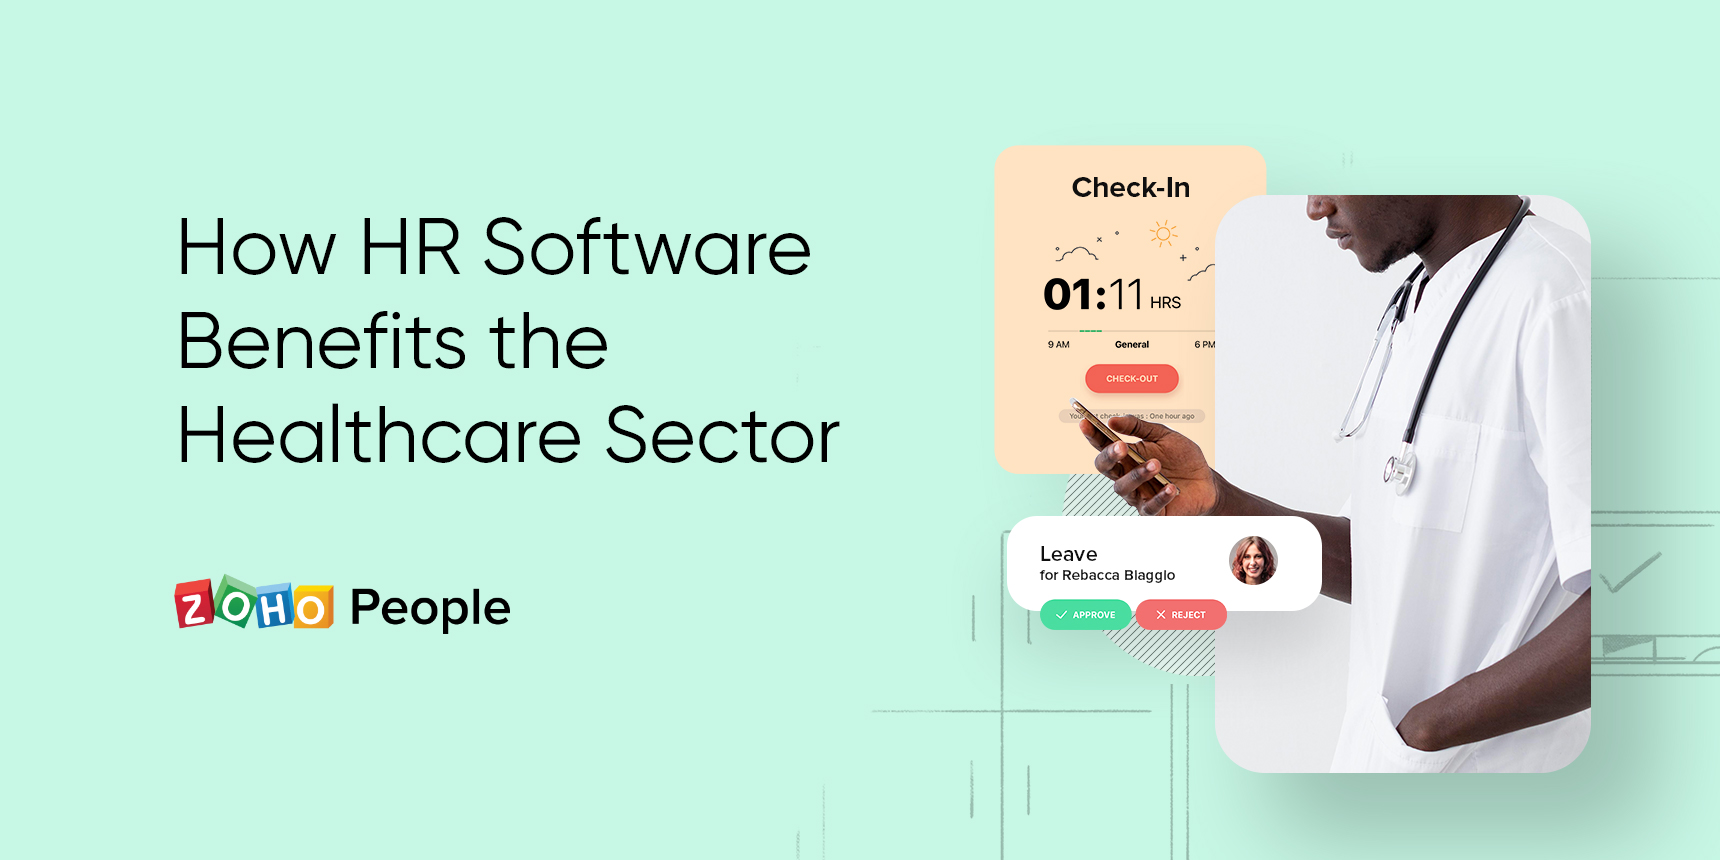 Benefits of HR software for the healthcare sector